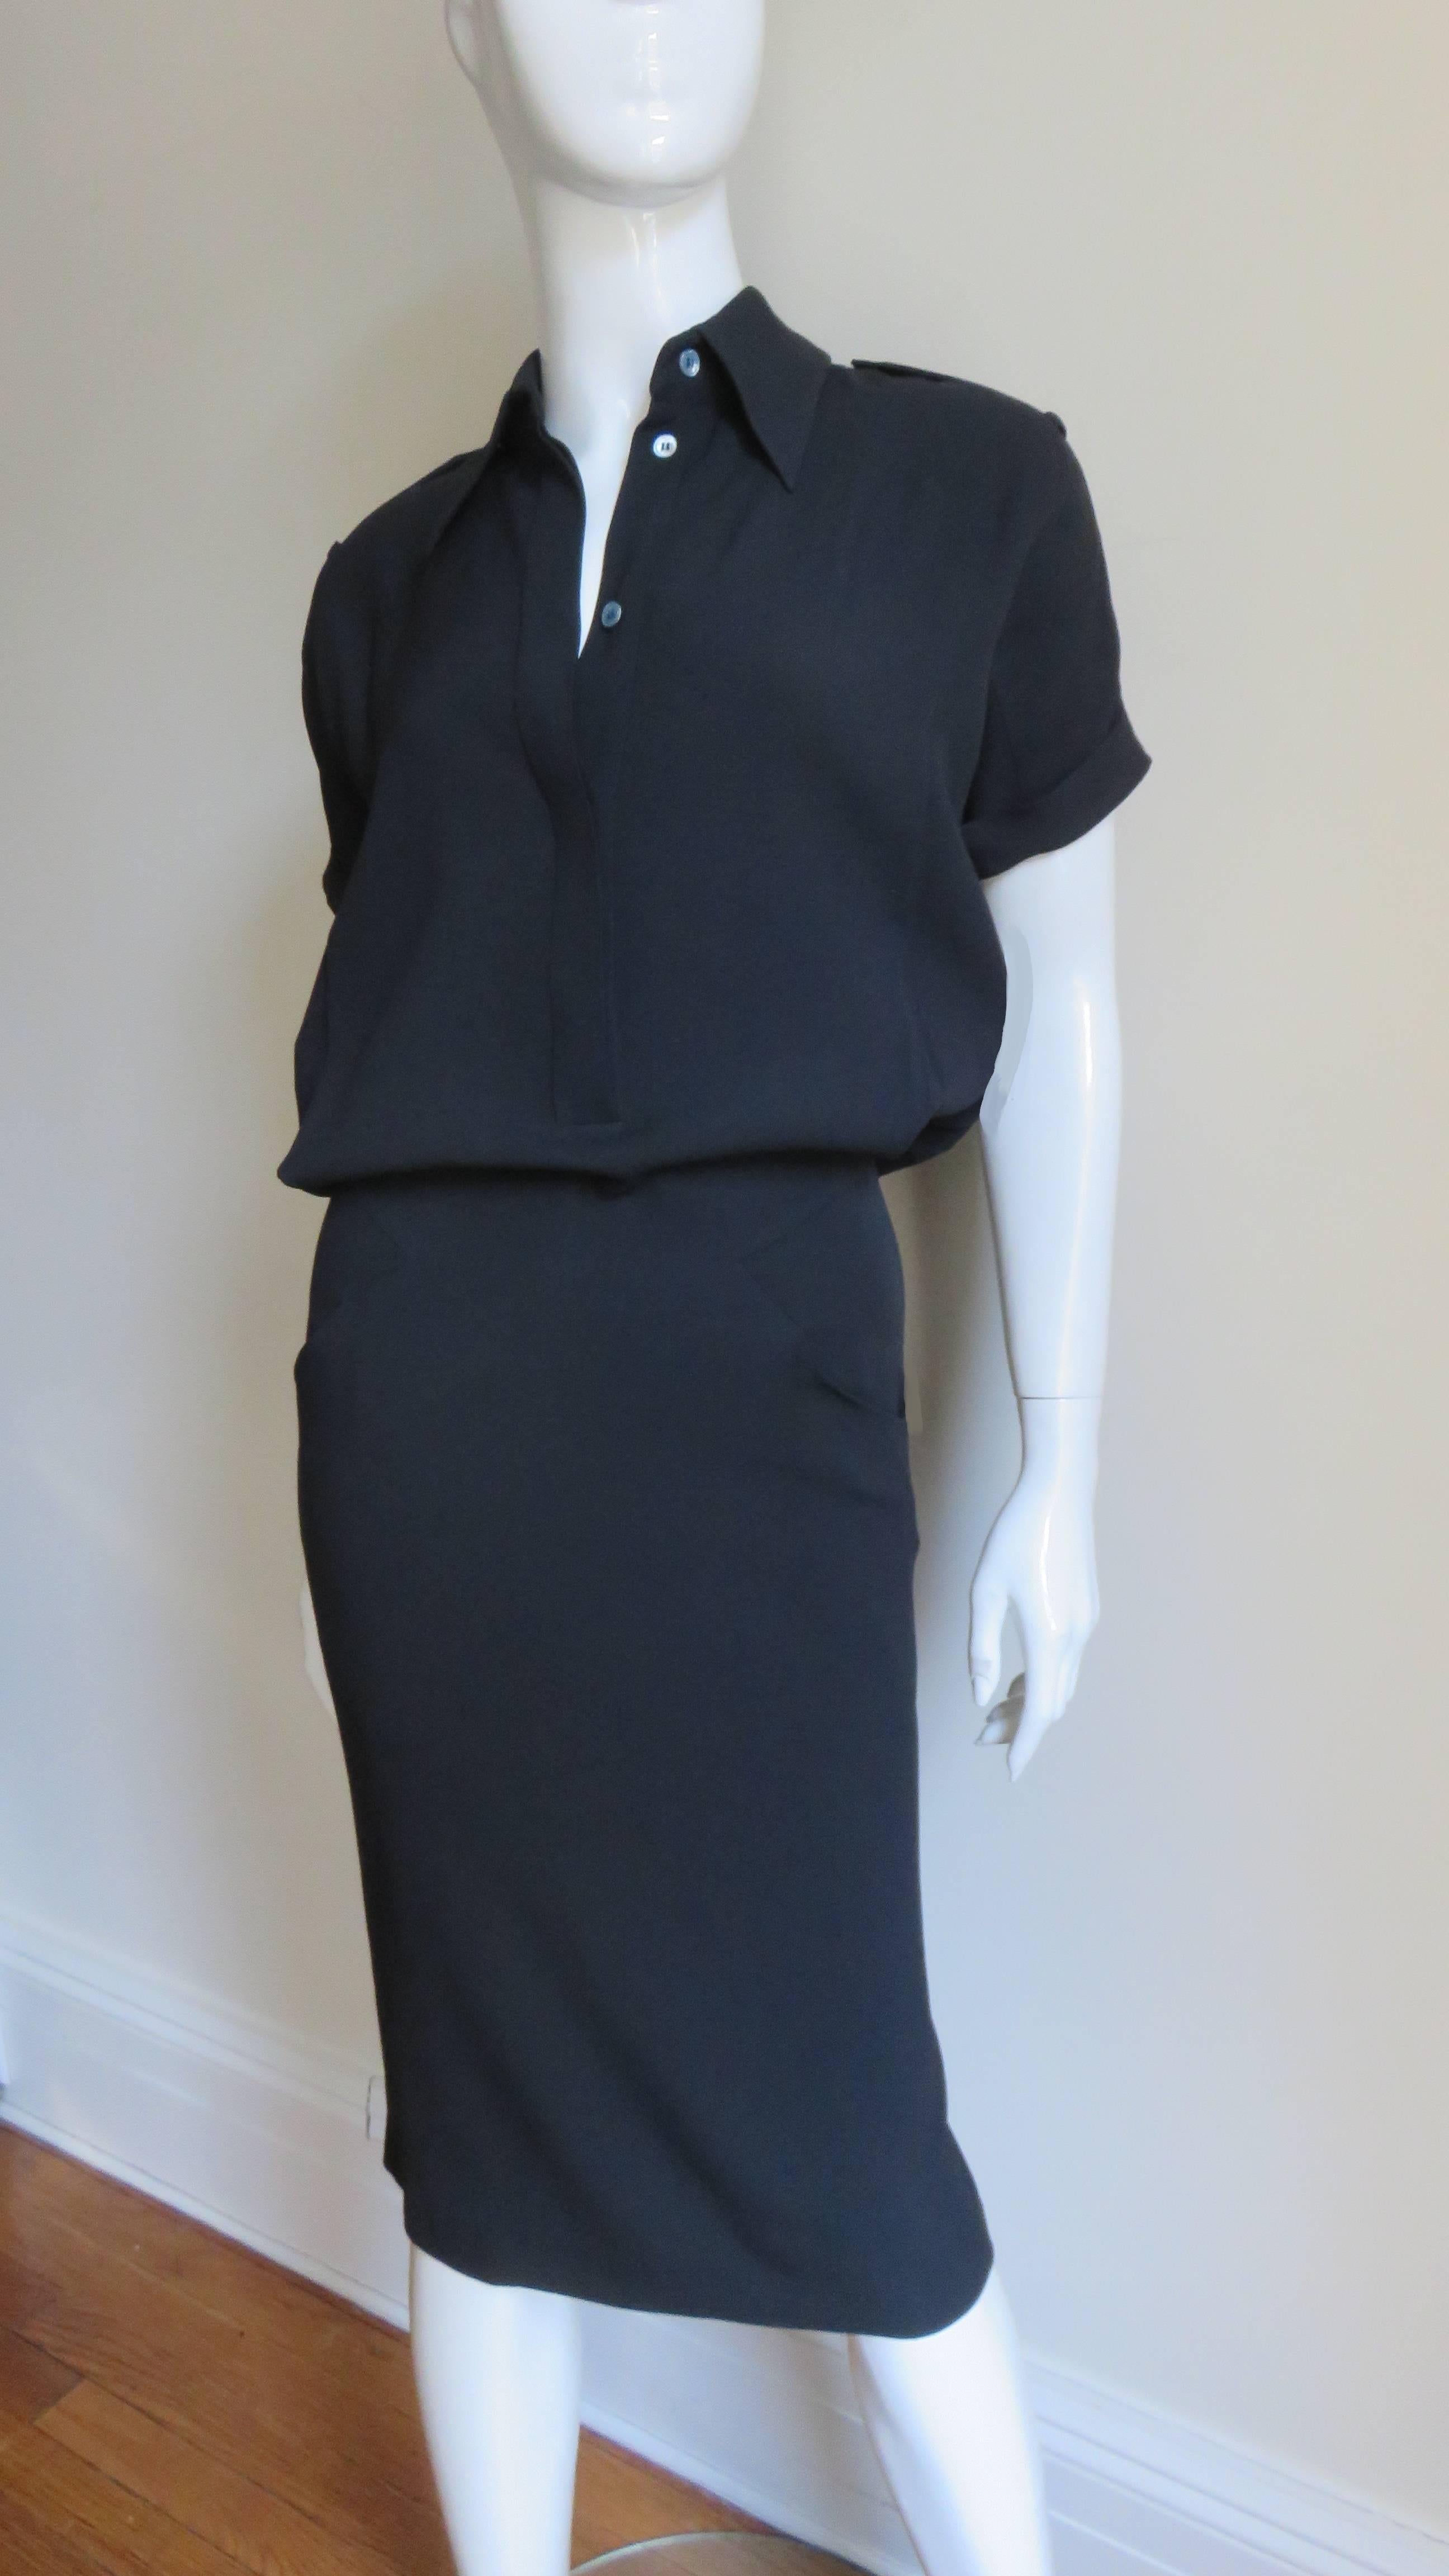 A fabulous chic black shirtwaist dress by Alexander McQueen.  The blouson bodice has a shirt collar, short cuffed dolman sleeves, a back yoke, shoulder epaulettes with buttons and platinum colored mother of pearl buttons in a placket up the front.